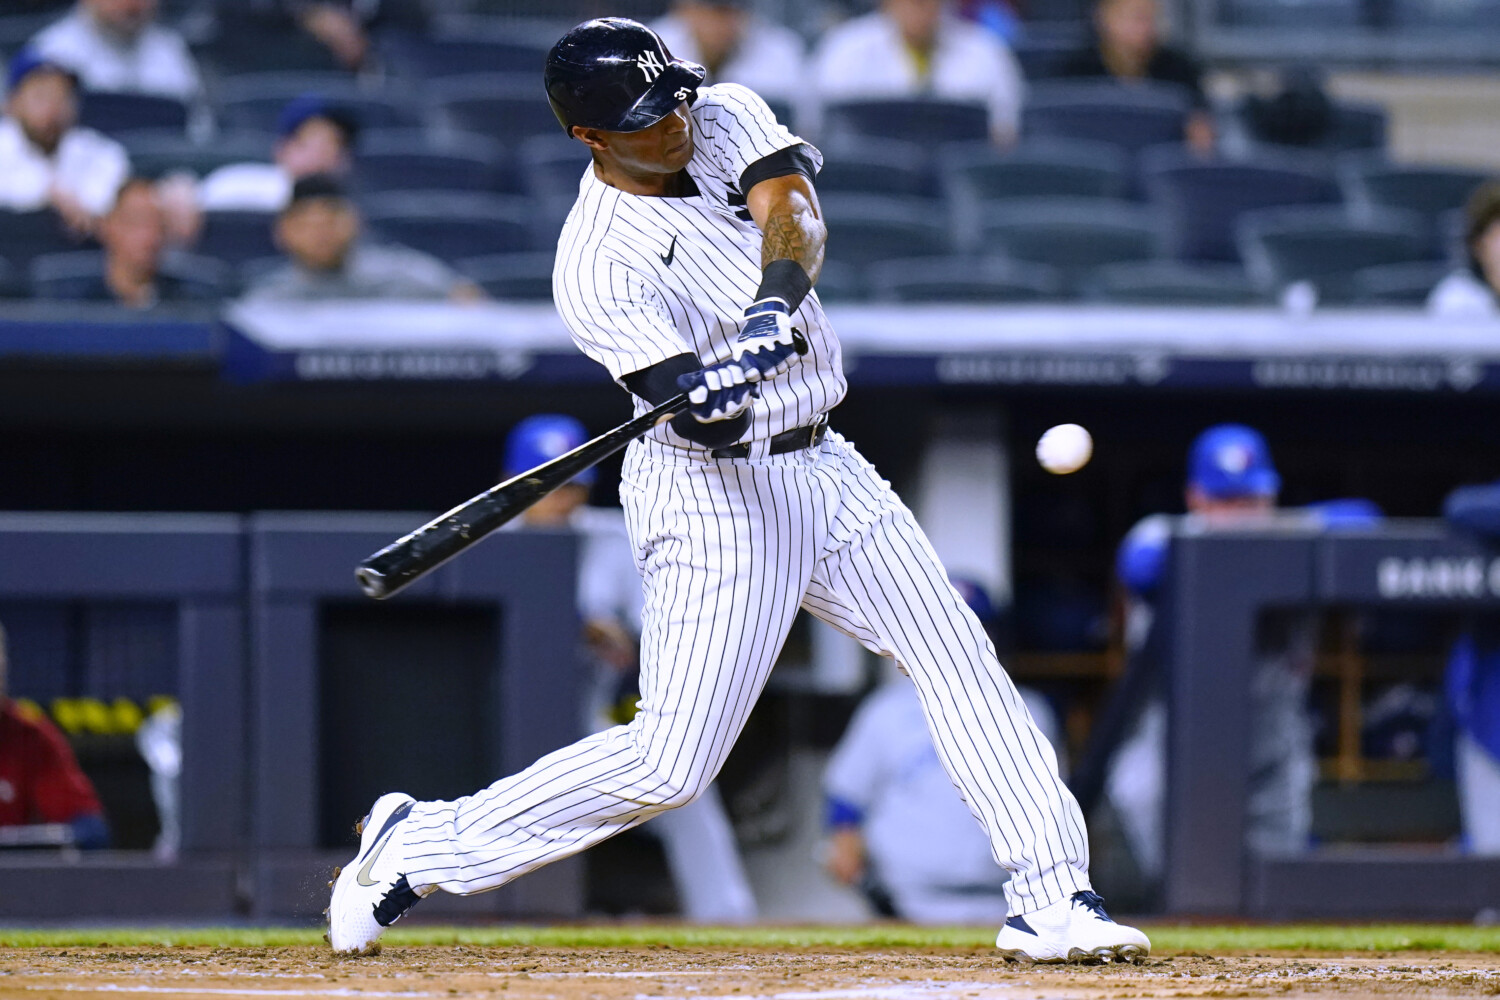 Did Dodgers make a mistake not picking up Aaron Hicks after Yankees release?